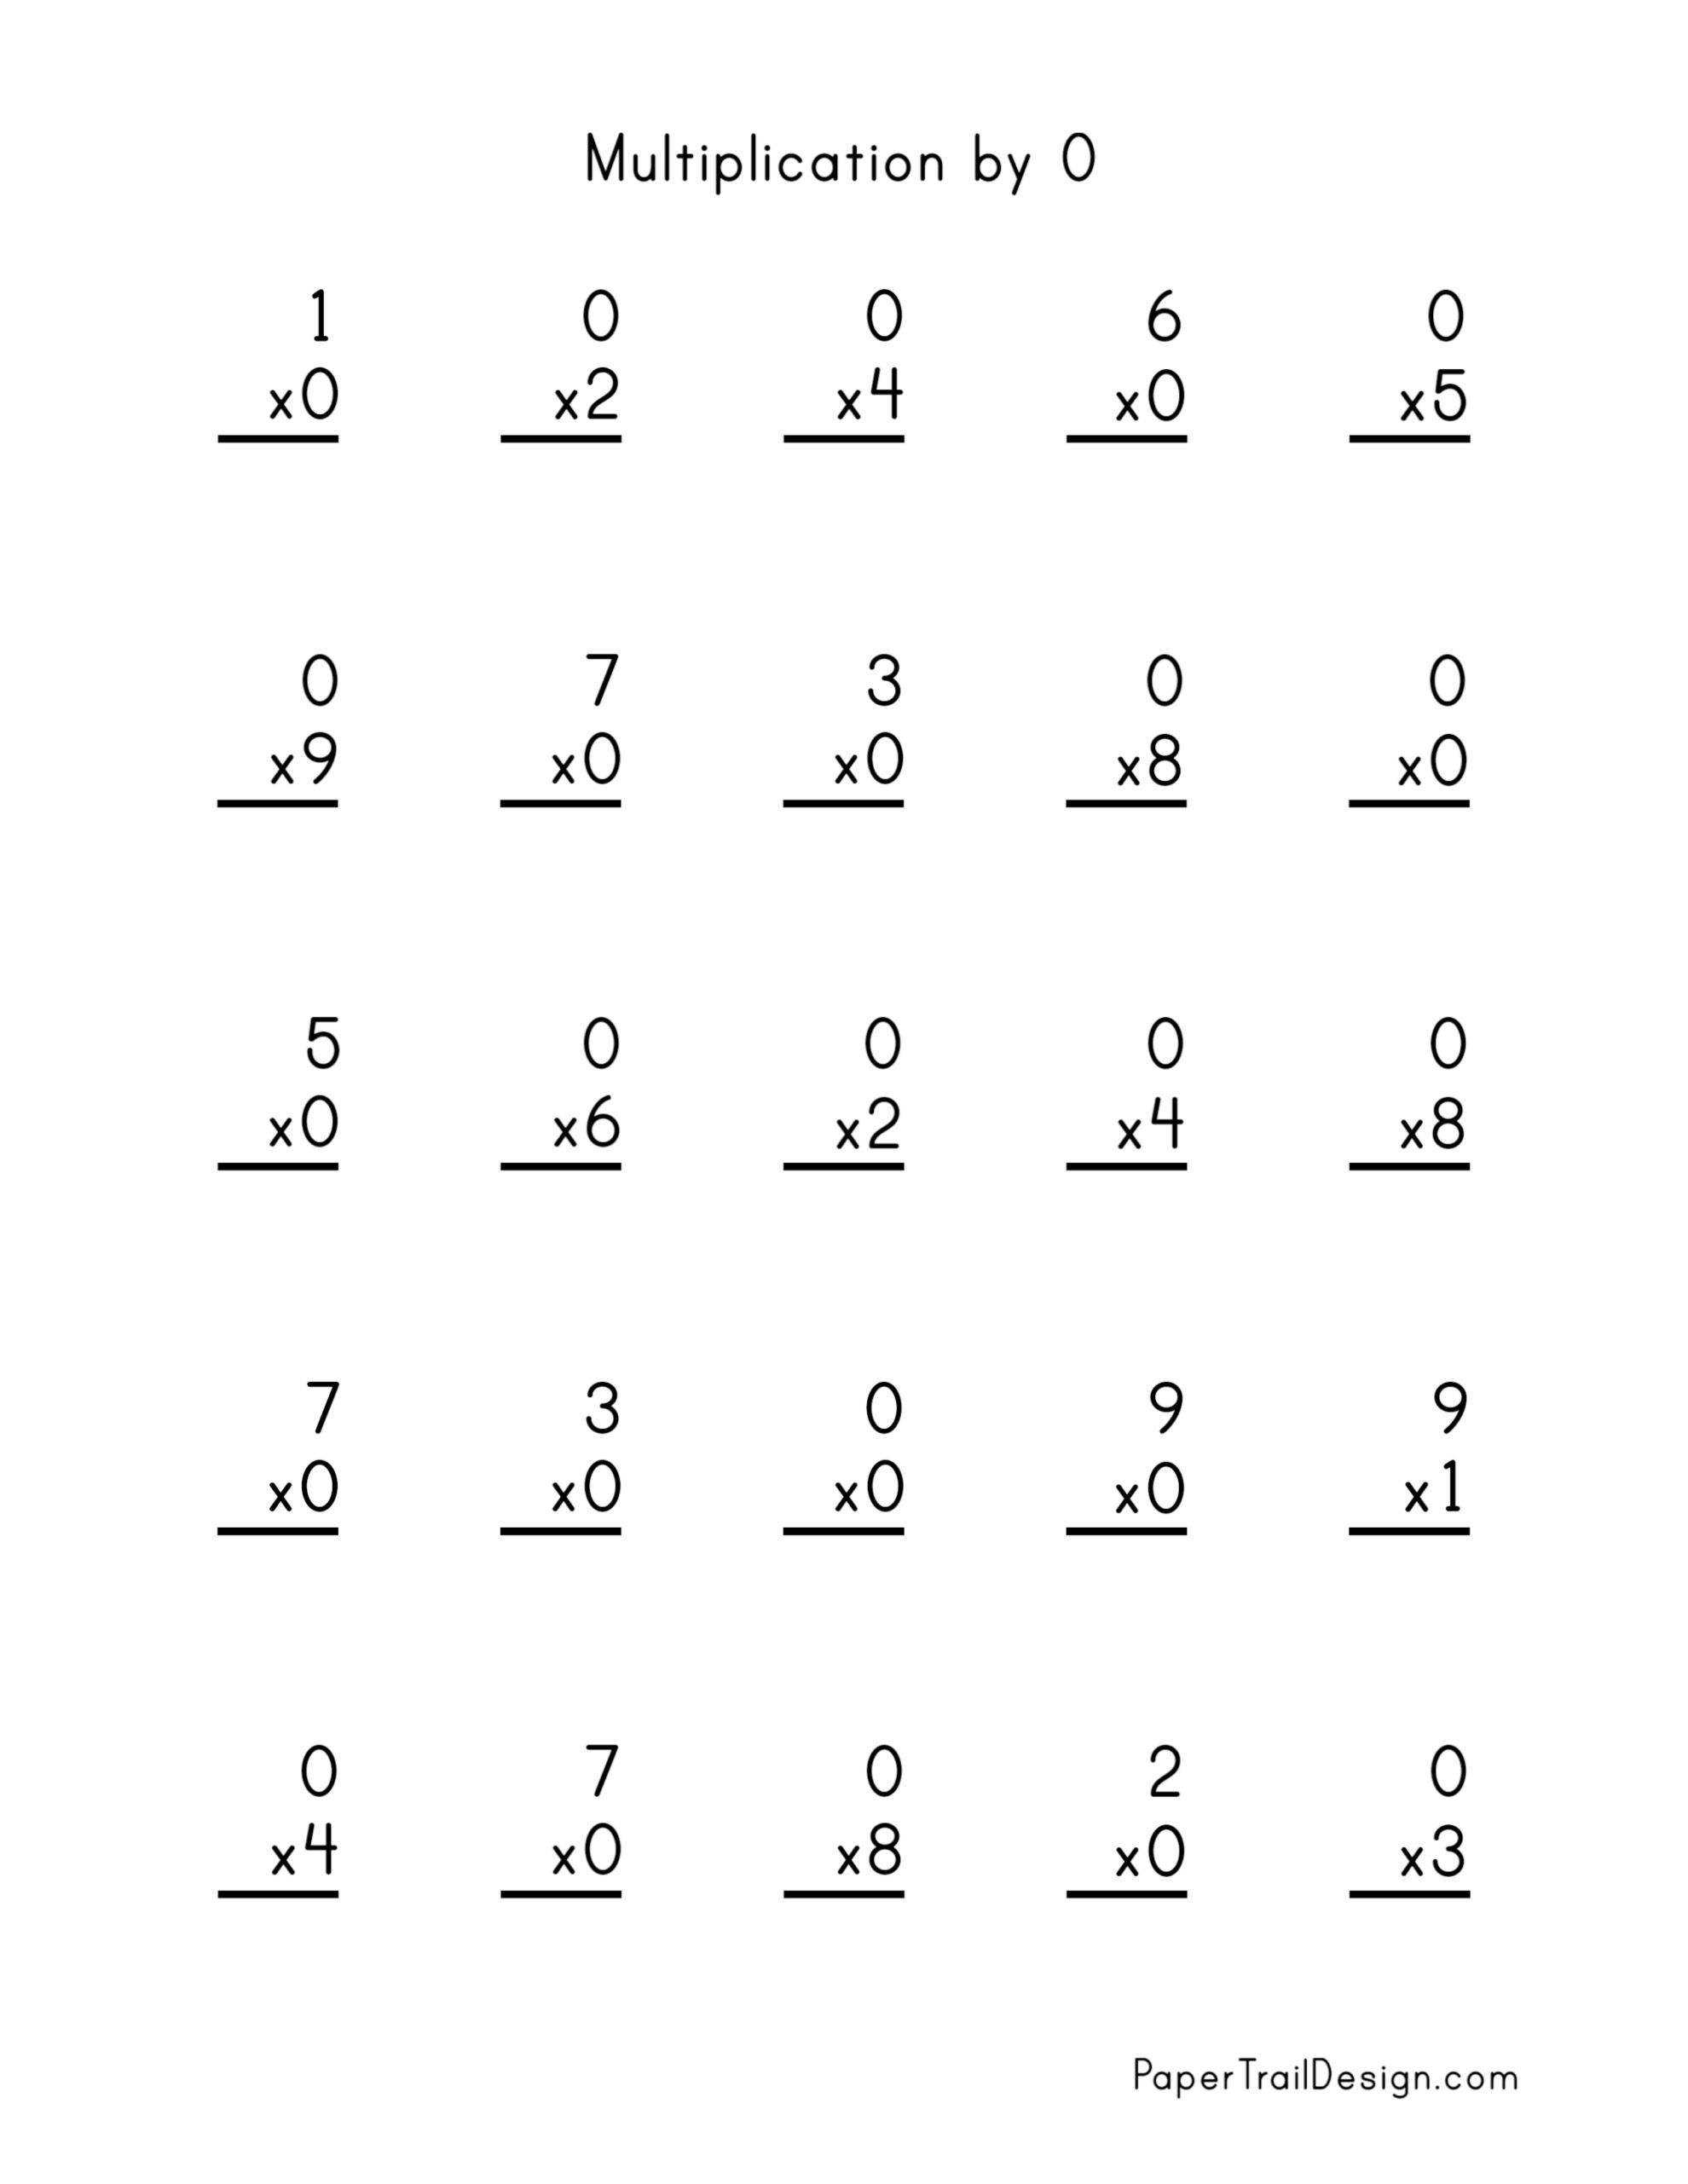 multiplication-table-practice-worksheets-pdf-cabinets-matttroy